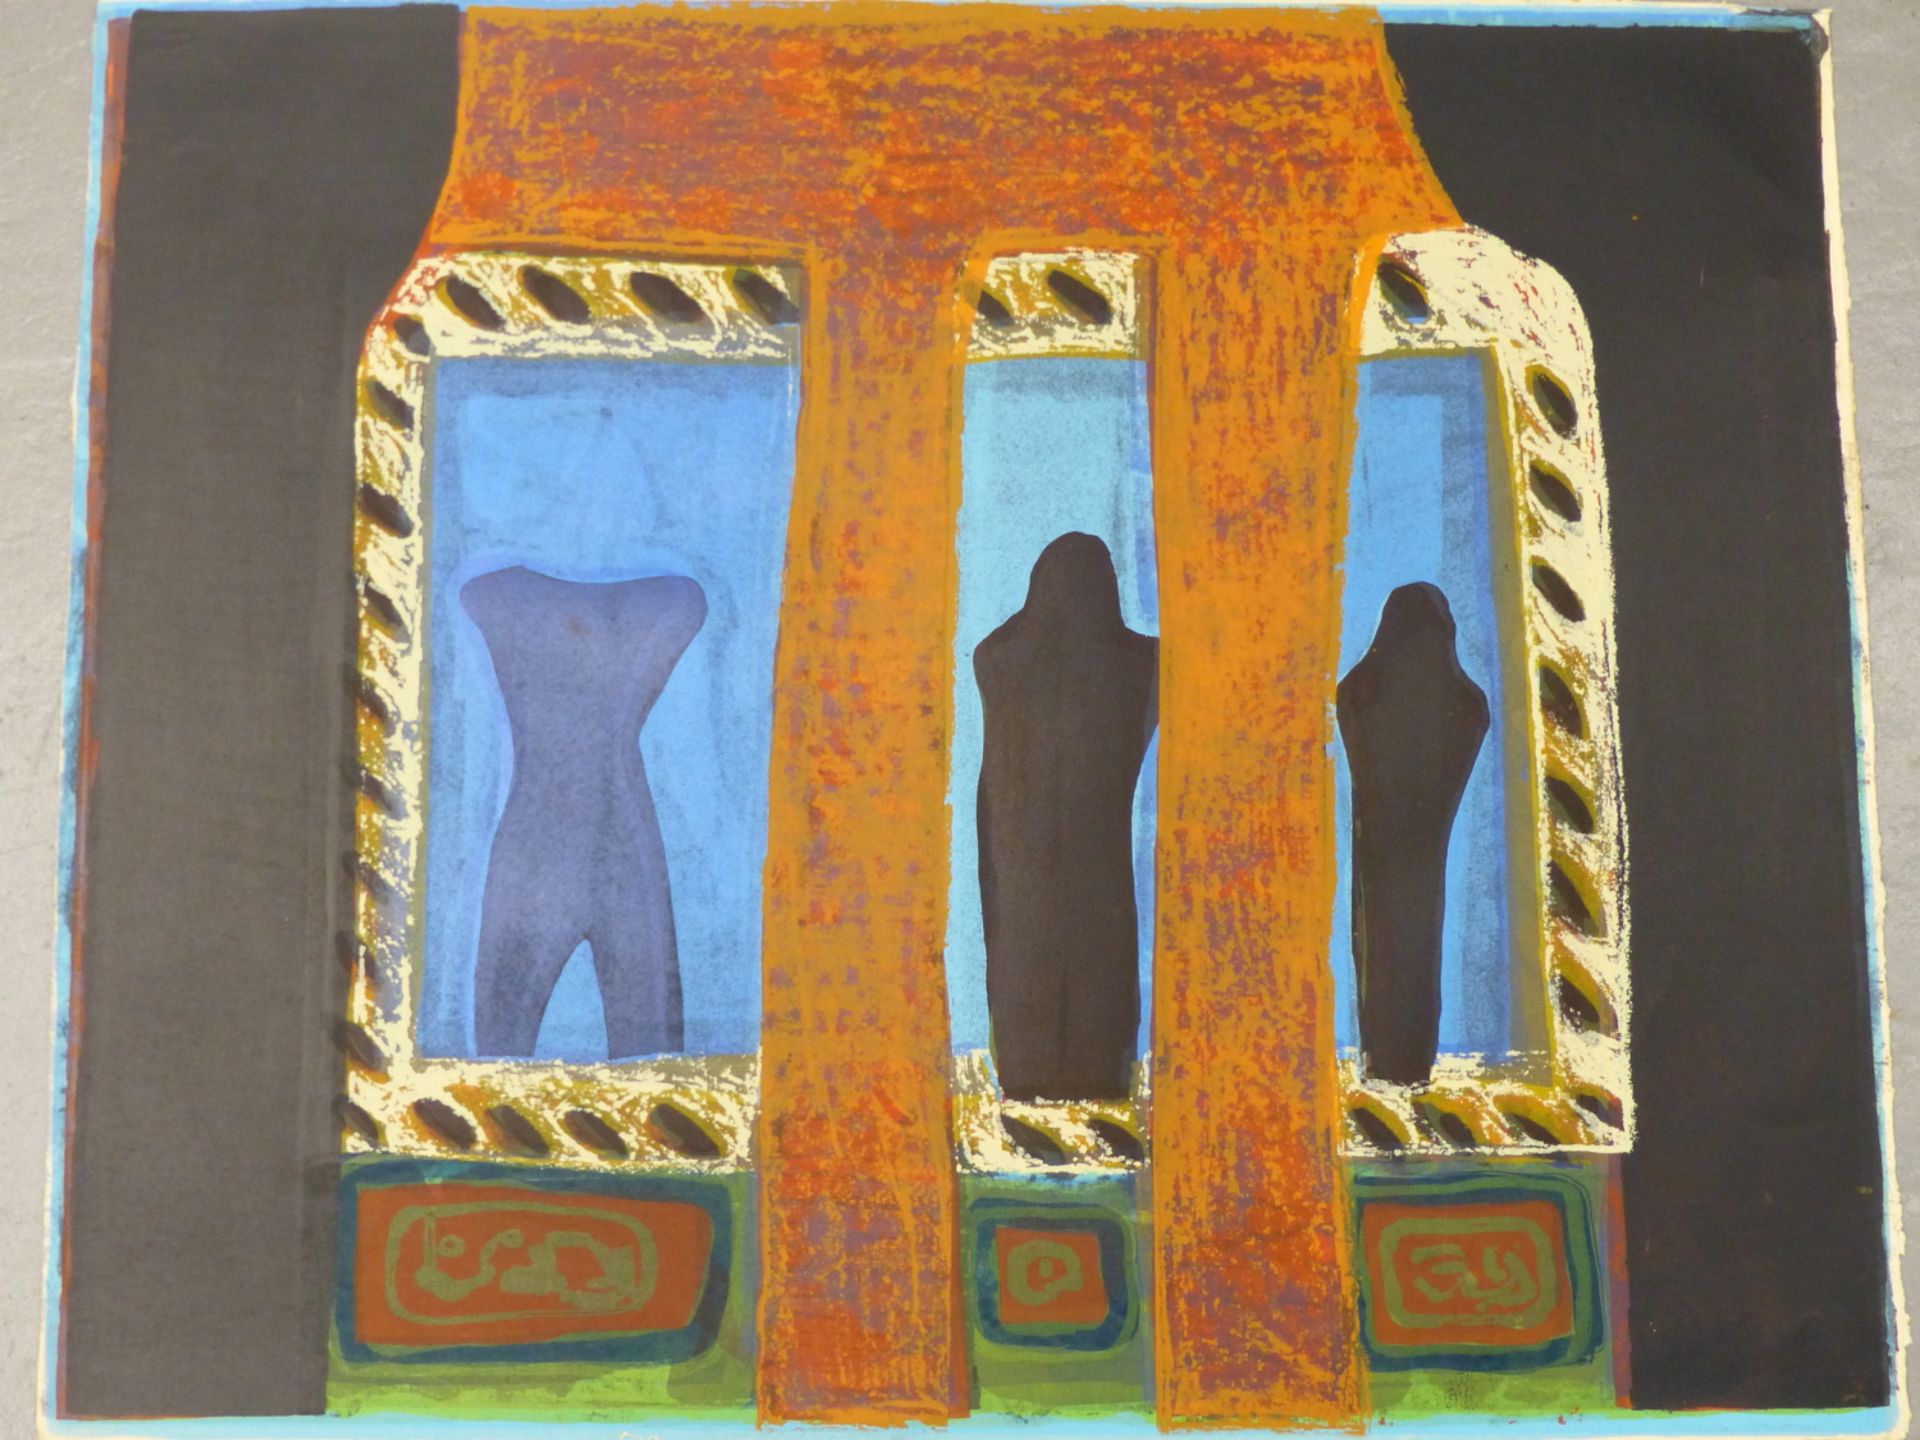 PAMELA CLARKSON ( 20TH CENTURY) ARR. THREE STANDING FIGURES. MULTI LAYER SCREEN PRINT ON HAND MADE P - Image 2 of 7